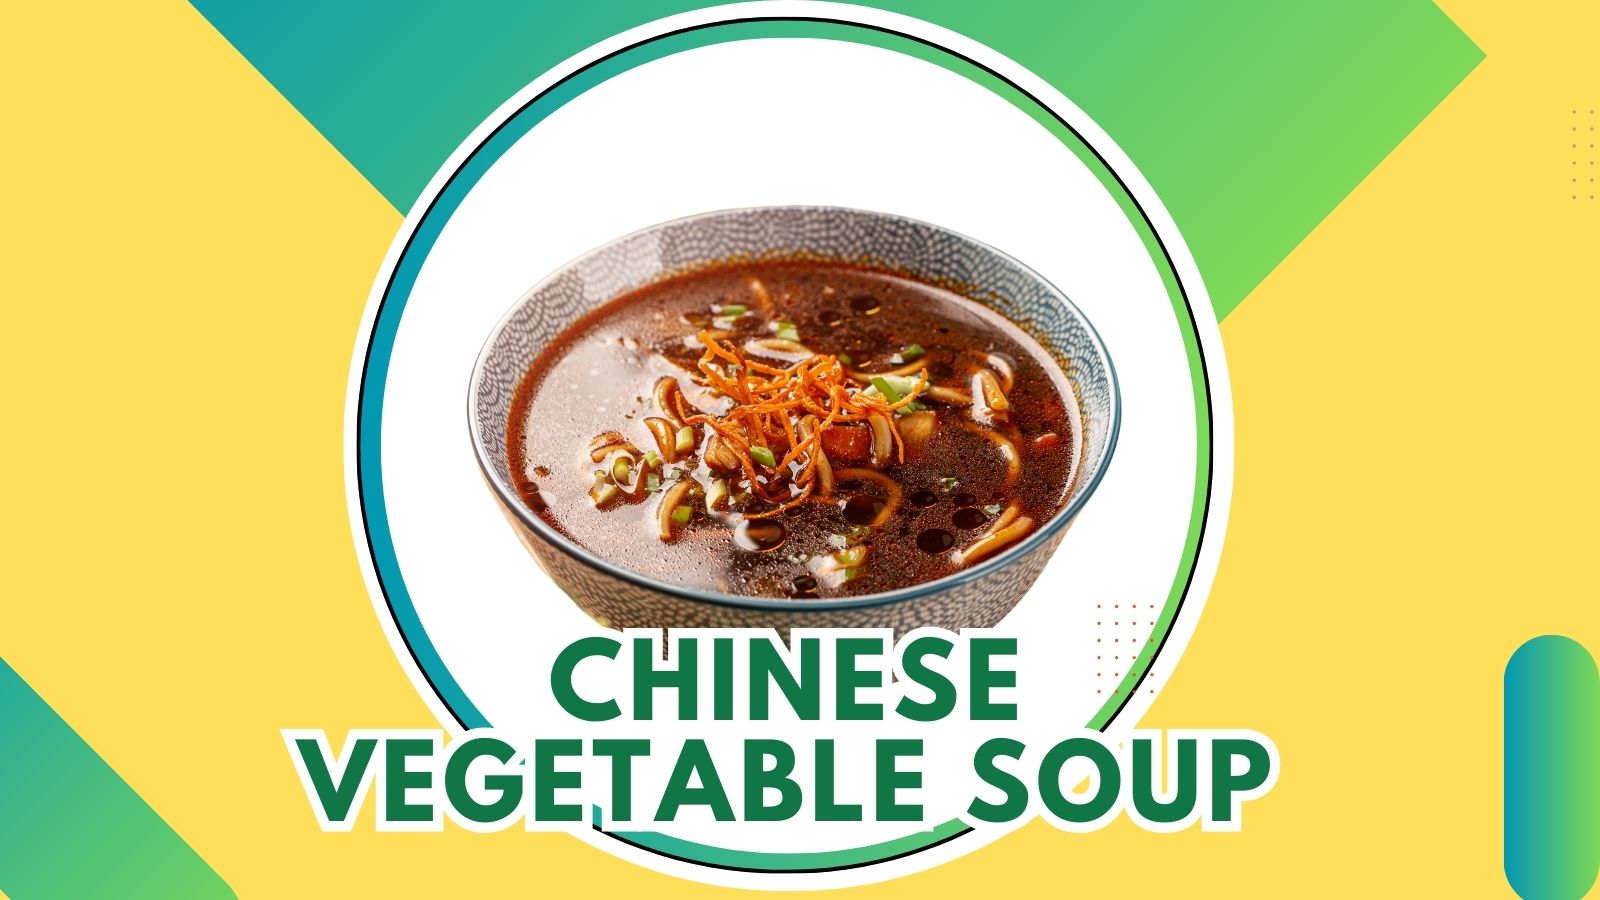 Chinese Vegetable Soup: A Nutritious and Delicious Delight